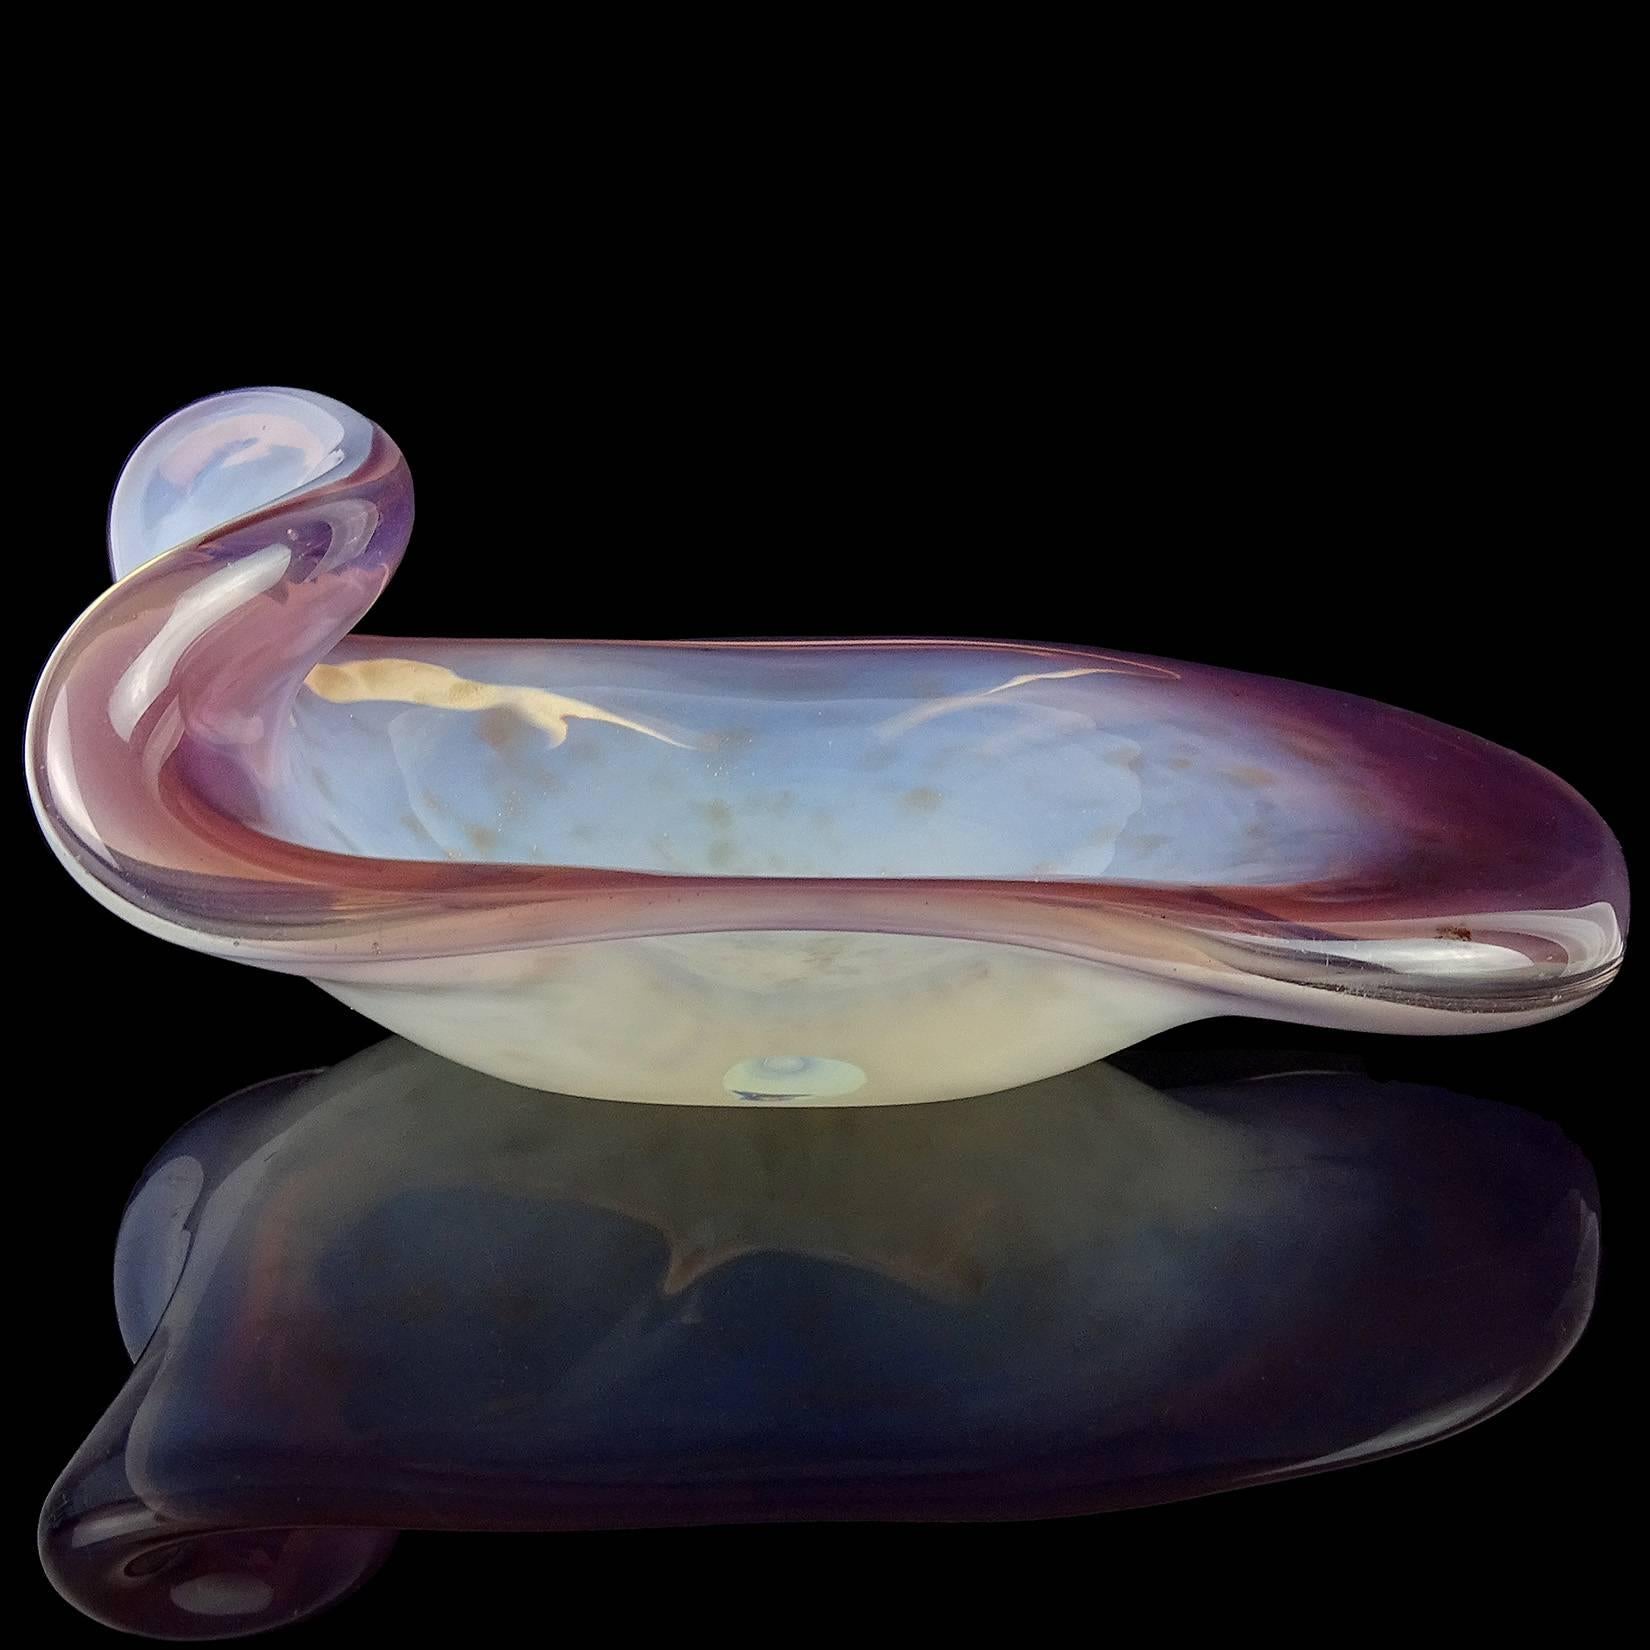 Beautiful vintage Murano hand blown lavender soft purple, white opal and copper aventurine flecks Italian art glass bowl. Documented to the Fratelli Toso company. It has a curled up rim, creating a unique shape. The aventurine pieces sparkle in the